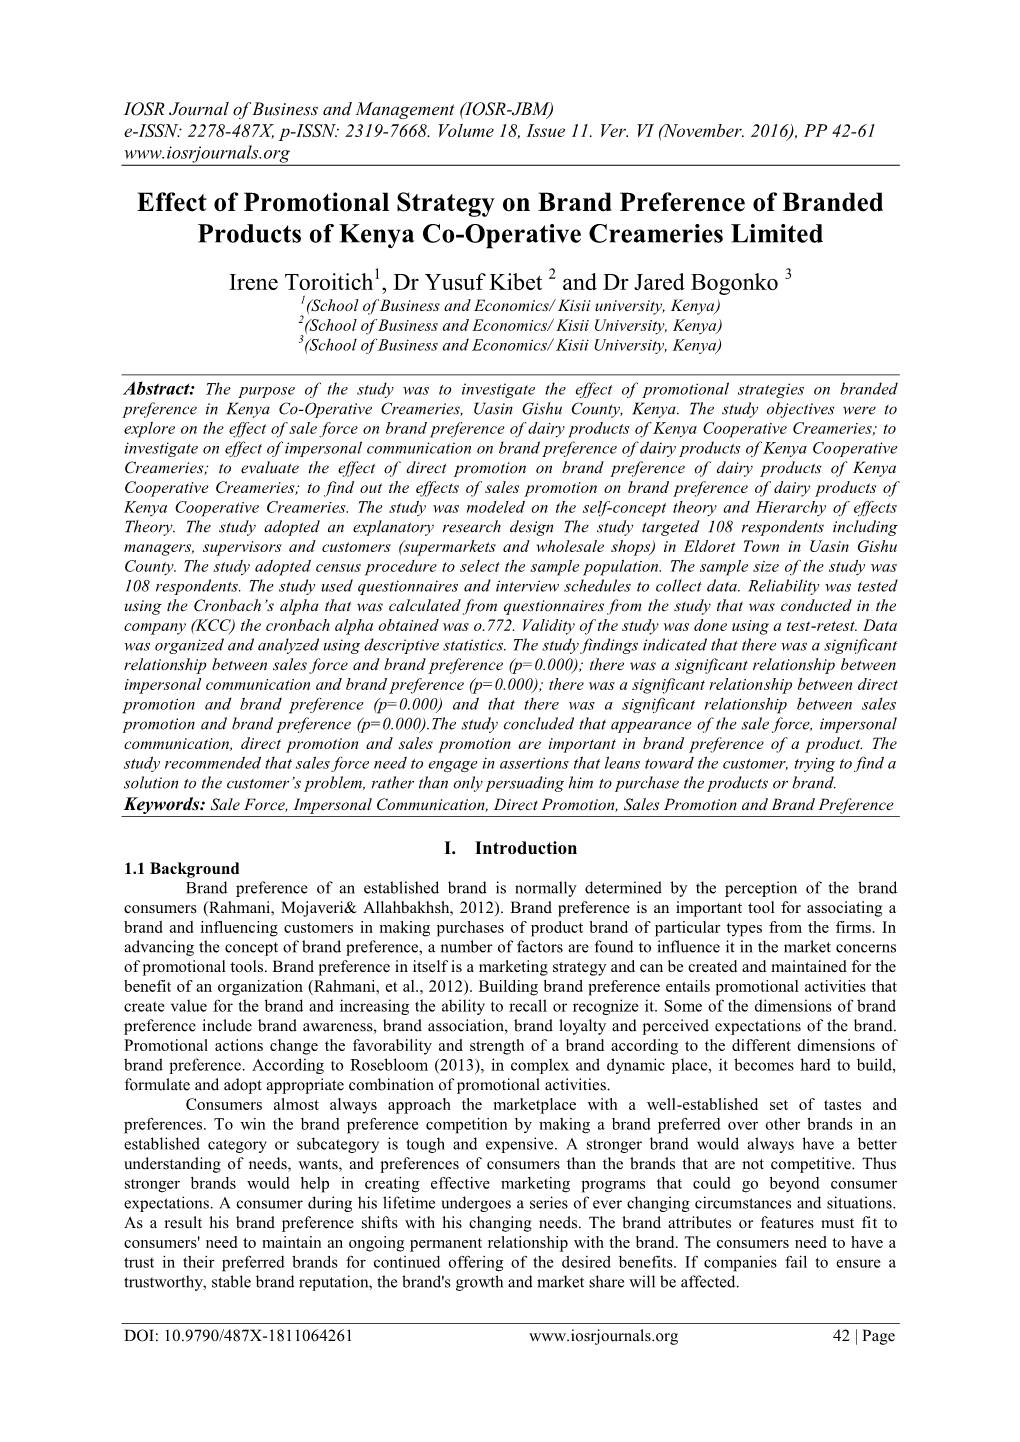 Effect of Promotional Strategy on Brand Preference of Branded Products of Kenya Co-Operative Creameries Limited